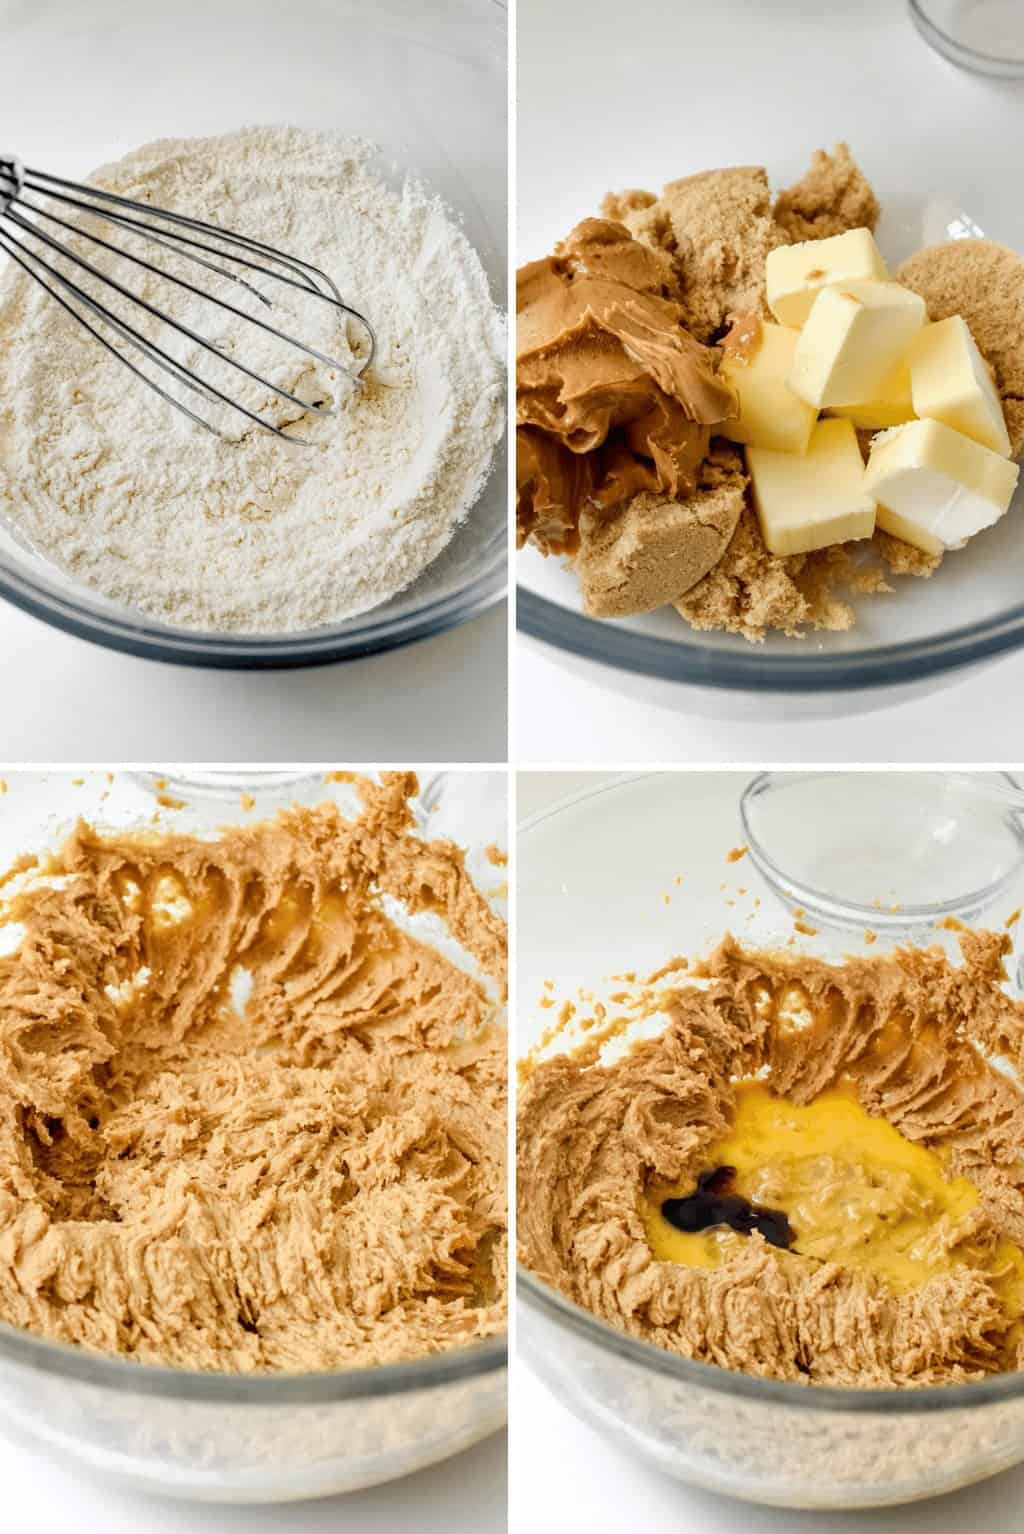 Four photo collage showing the process of making peanut butter cookie dough